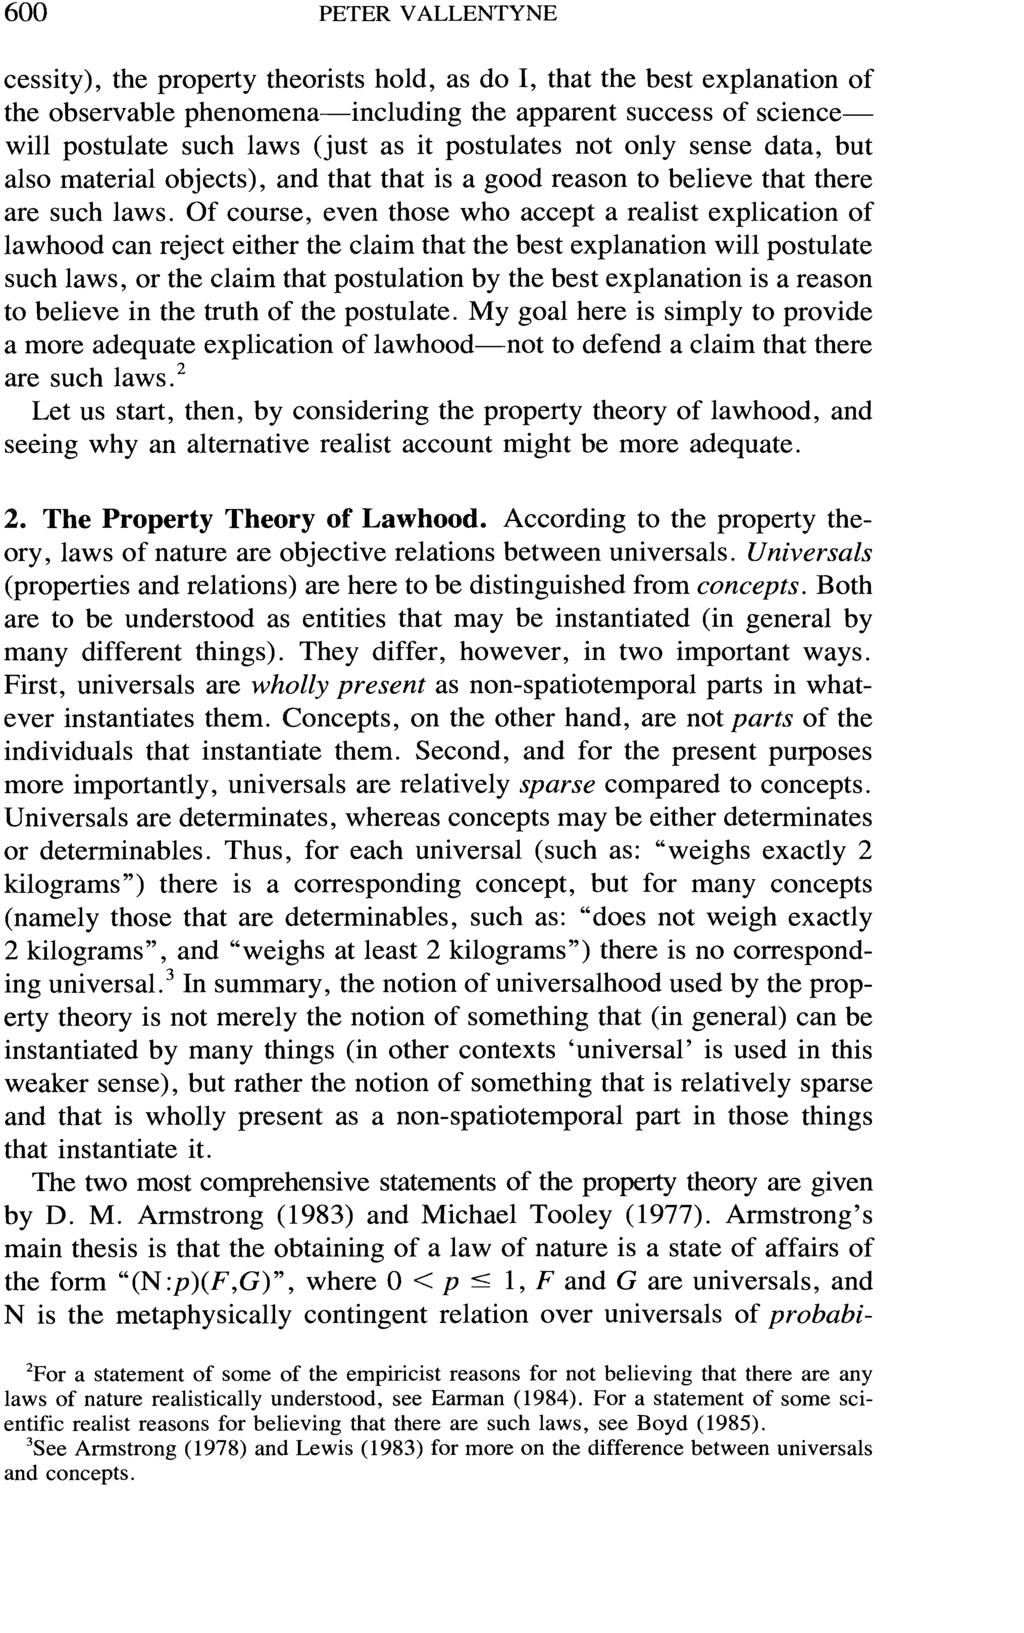 600 PETER VALLENTYNE cessity), the property theorists hold, as do I, that the best explanation of the observable phenomena-including the apparent success of sciencewill postulate such laws (just as